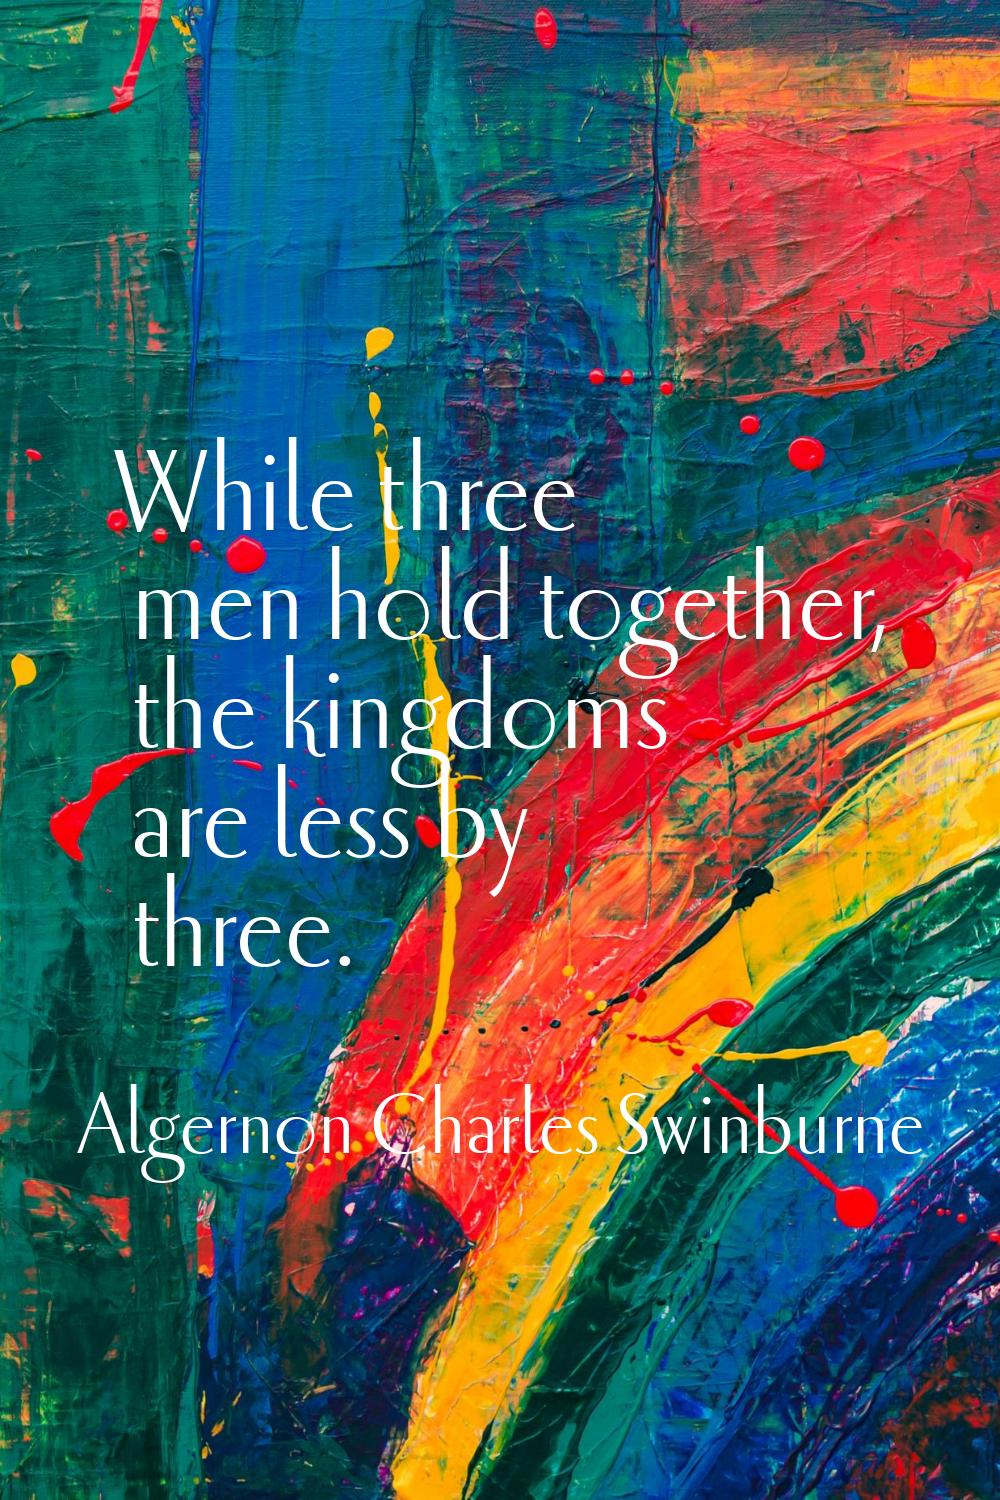 While three men hold together, the kingdoms are less by three.